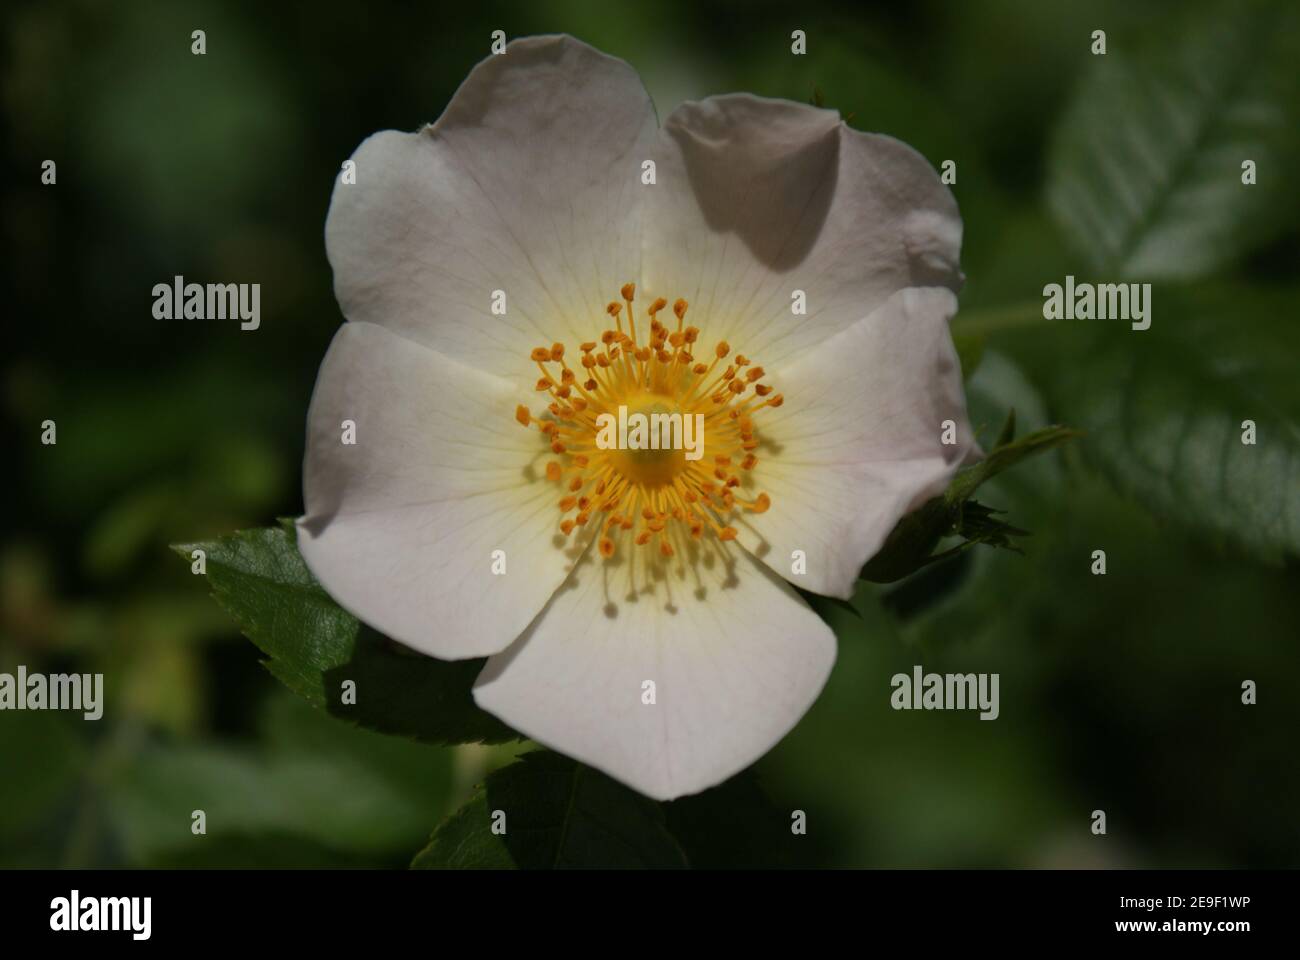 Dog Rose / Rosa Canina / Rosier Sauvage / Eglantine a modest wiid flower of love, life and a Midsummer NightsDream Stock Photo